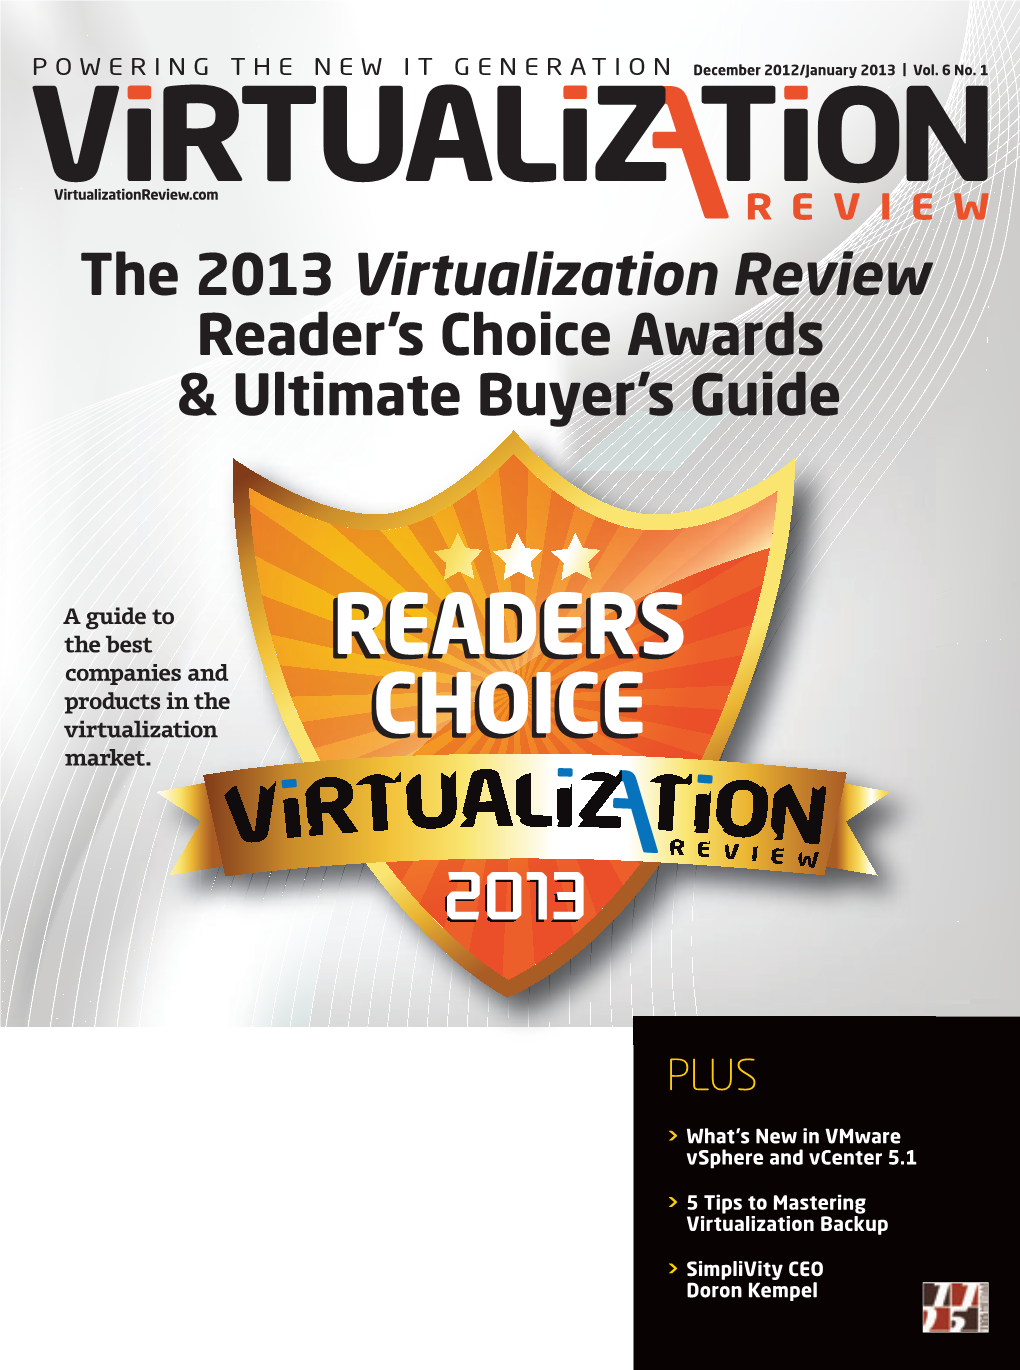 Virtualizationreview.Com the 2013 Virtualization Review Reader’S Choice Awards & Ultimate Buyer’S Guide